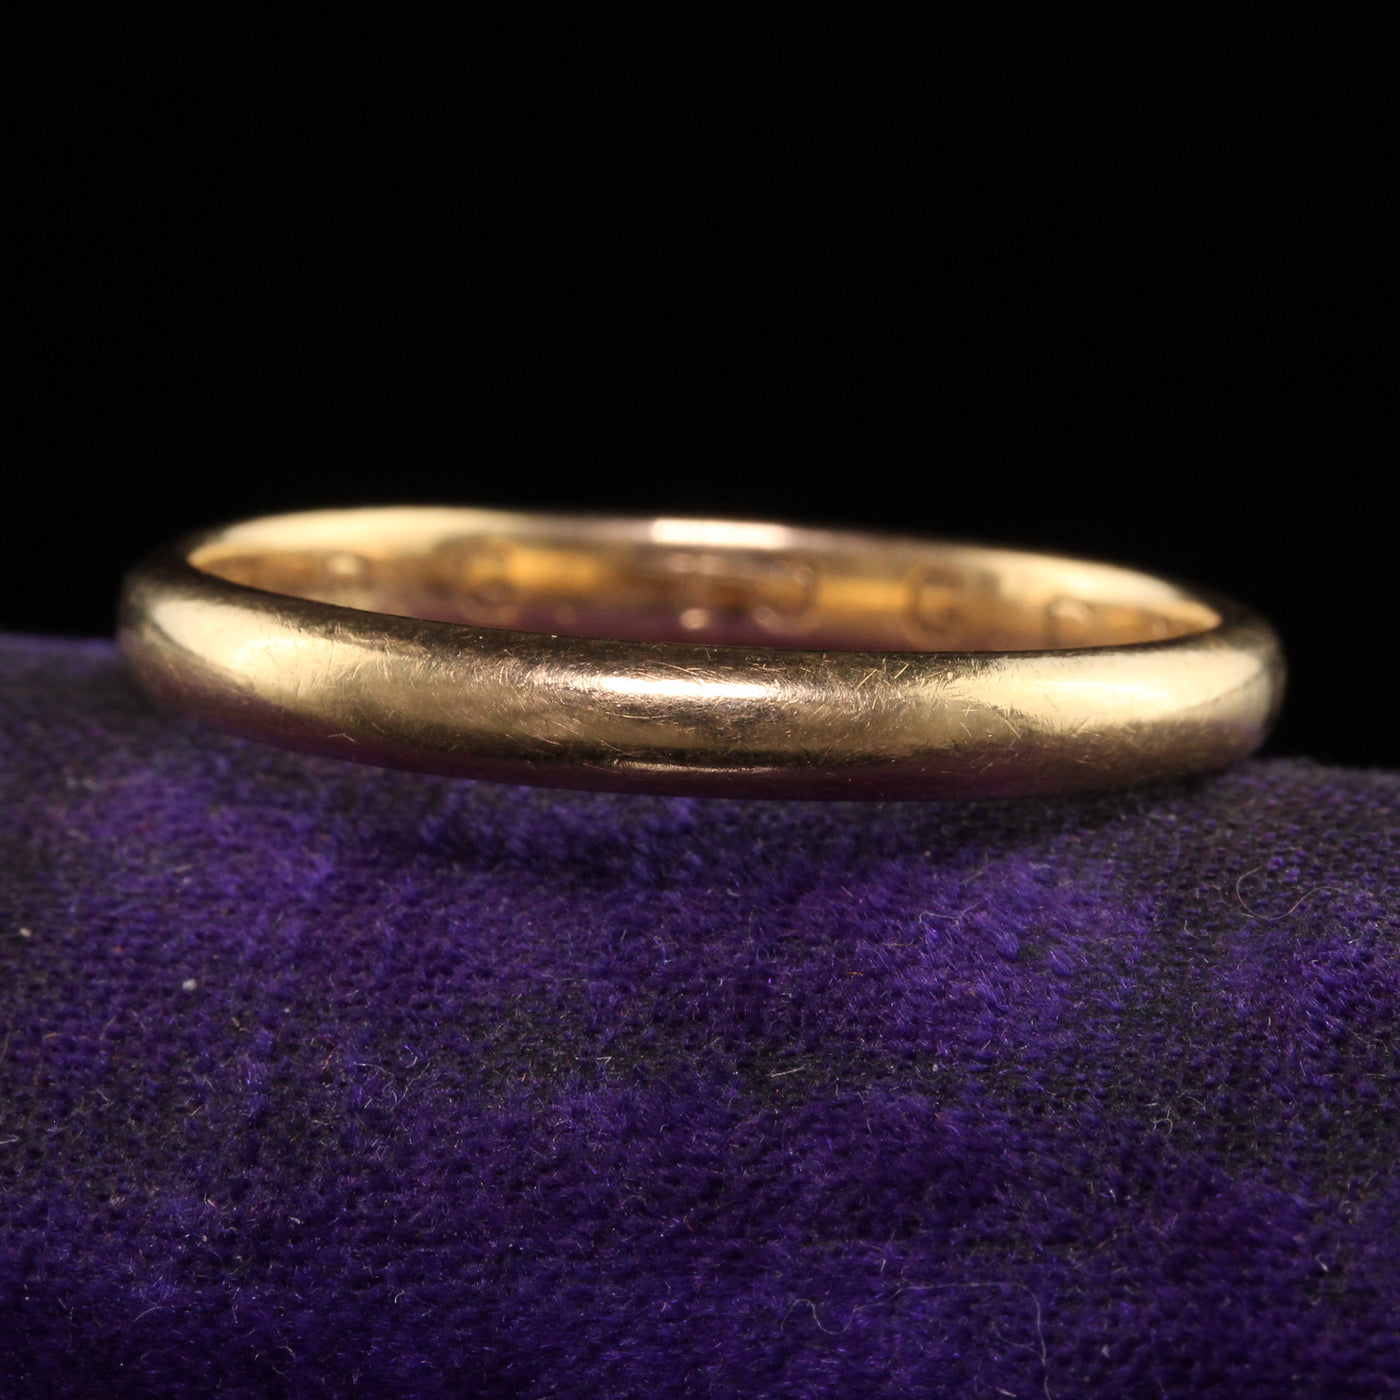 Antique Art Deco 18K Yellow Gold Classic Engraved Wedding Band - Size 13